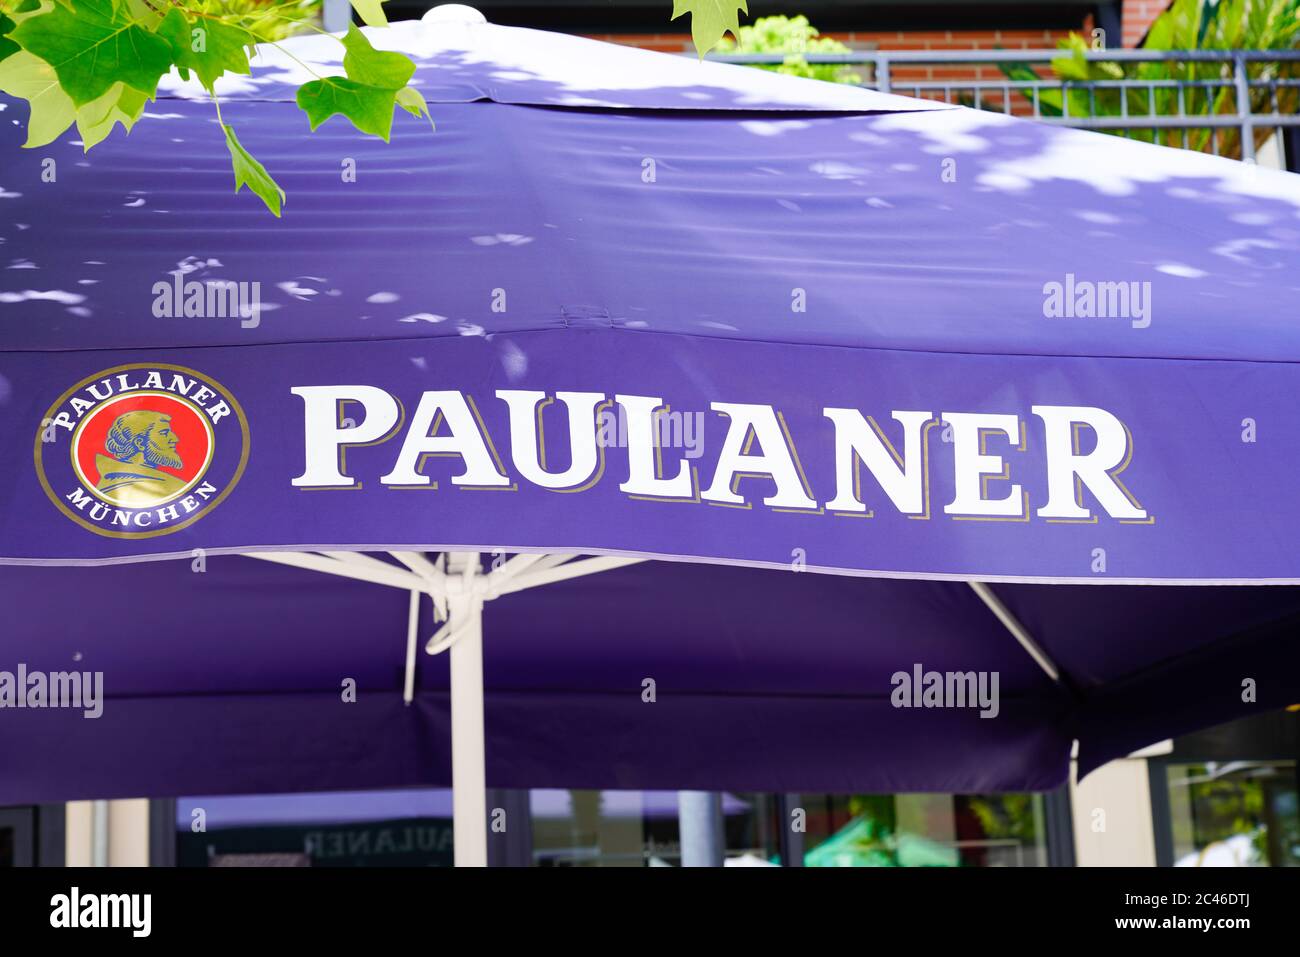 Bordeaux , Aquitaine / France - 06 20 2020 : Paulaner logo of beer with sign on street bar pub coffee restaurant Stock Photo